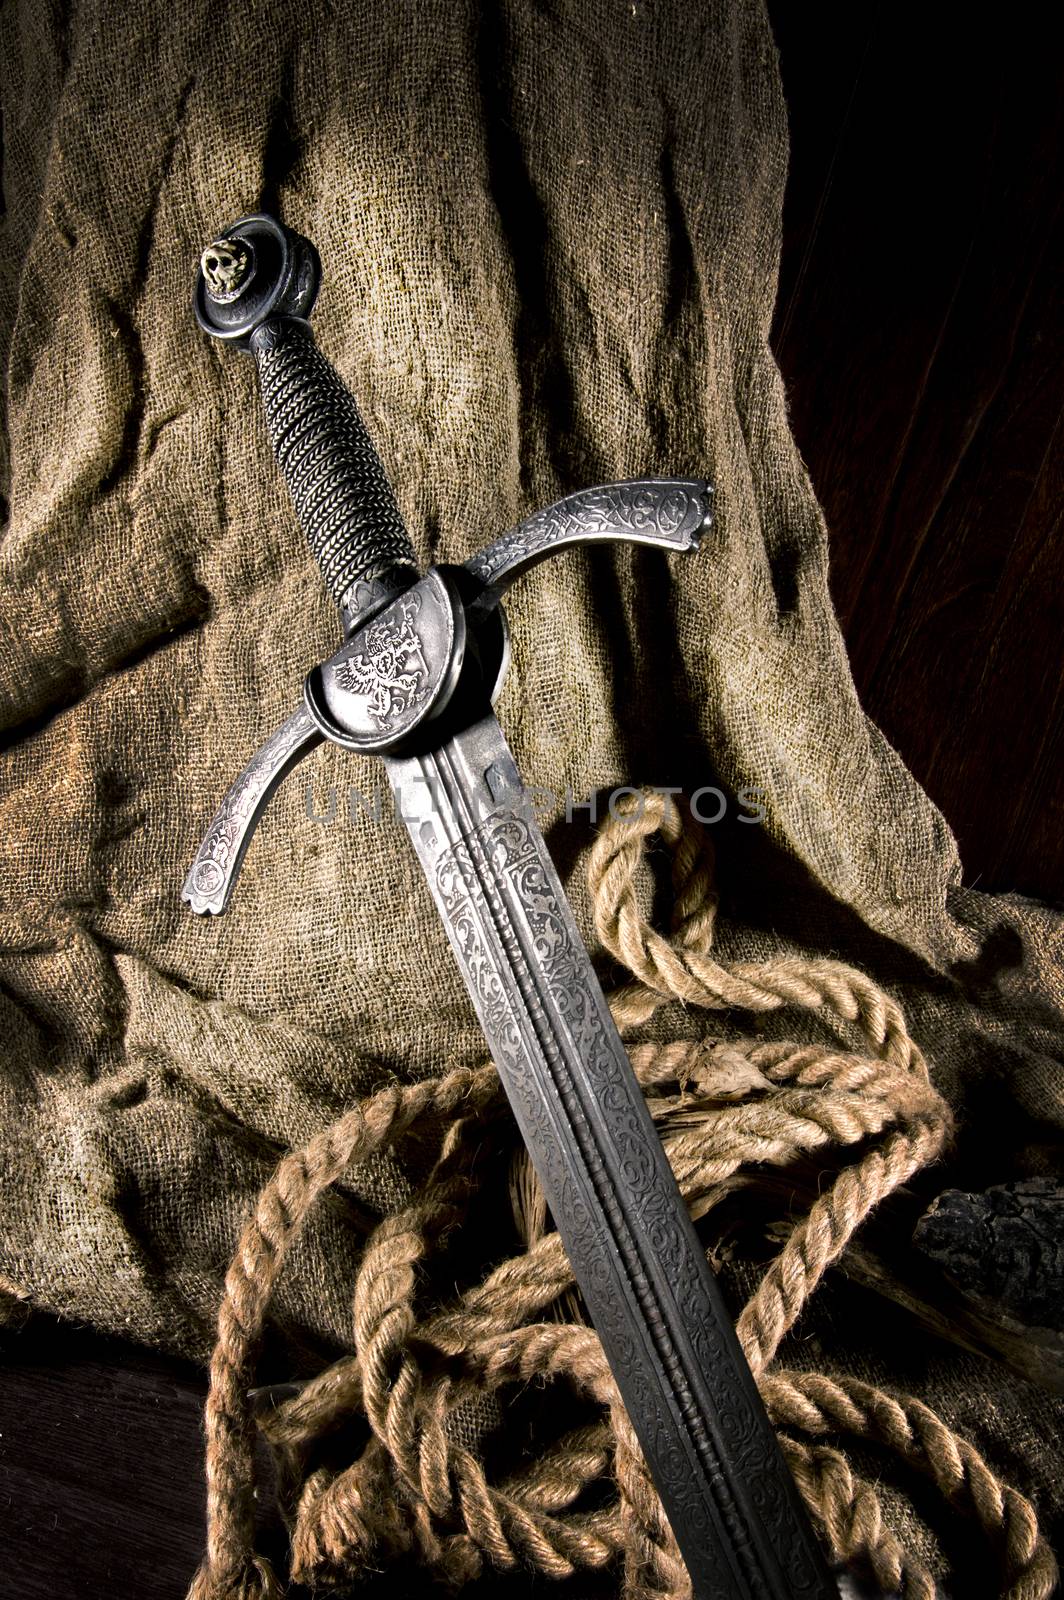 smart sword of the knight of the middle ages by sibrikov